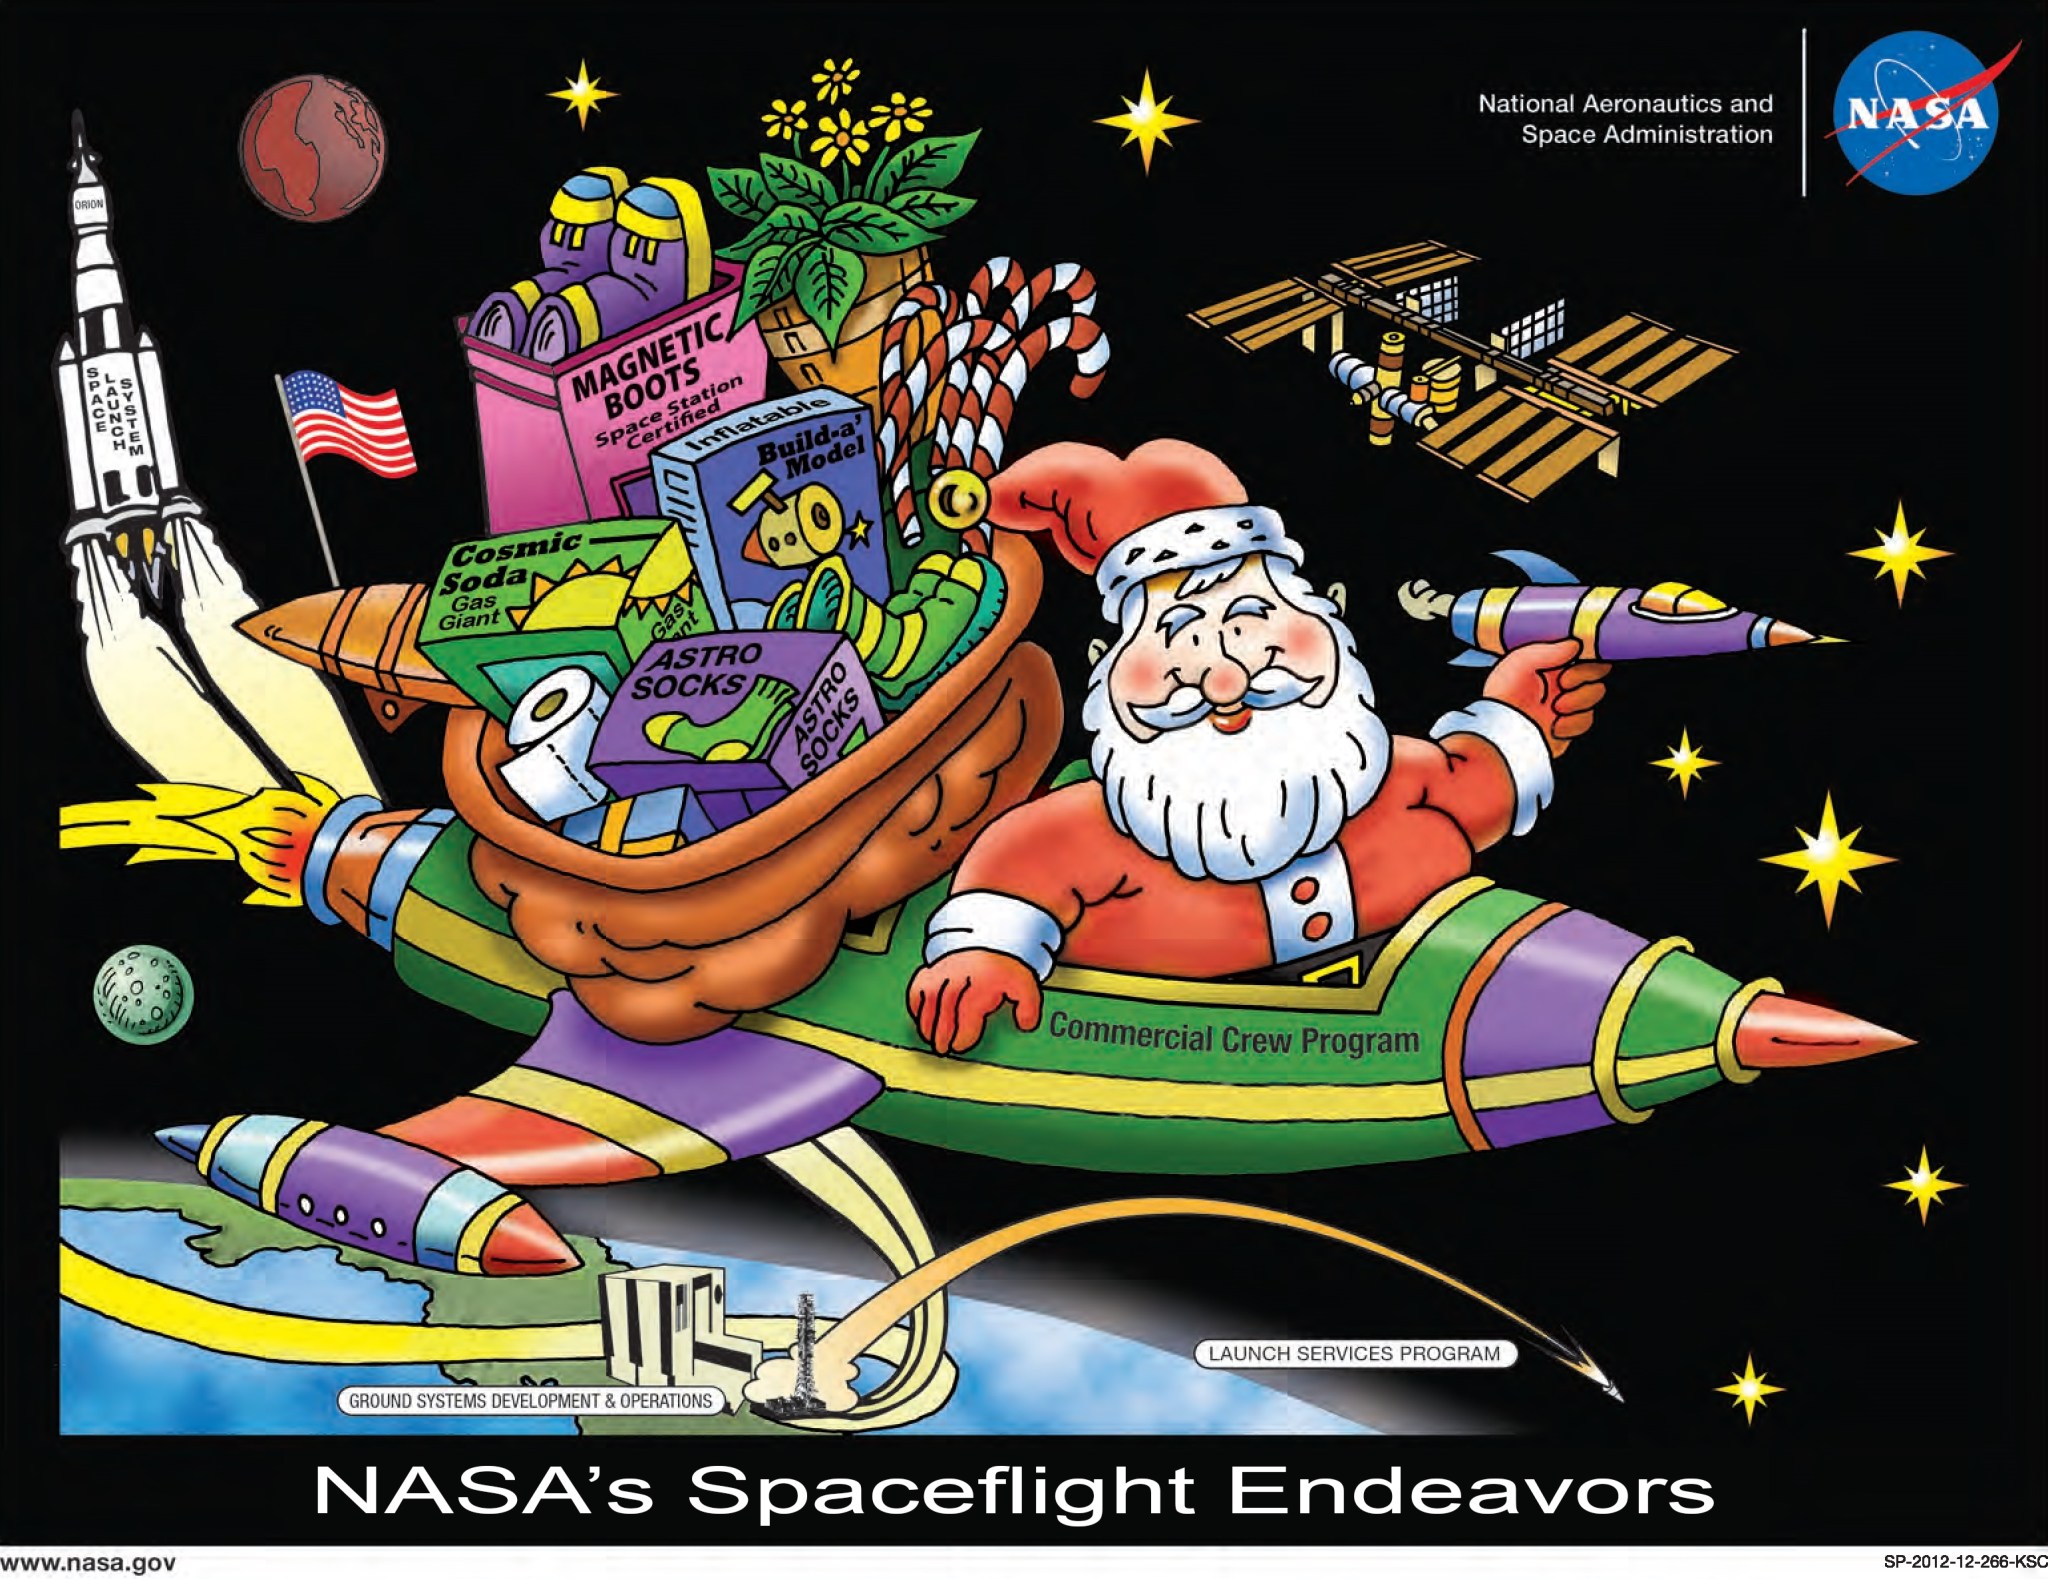 Kennedy Space Center Counts Down to Santa's Toy Delivery Mission